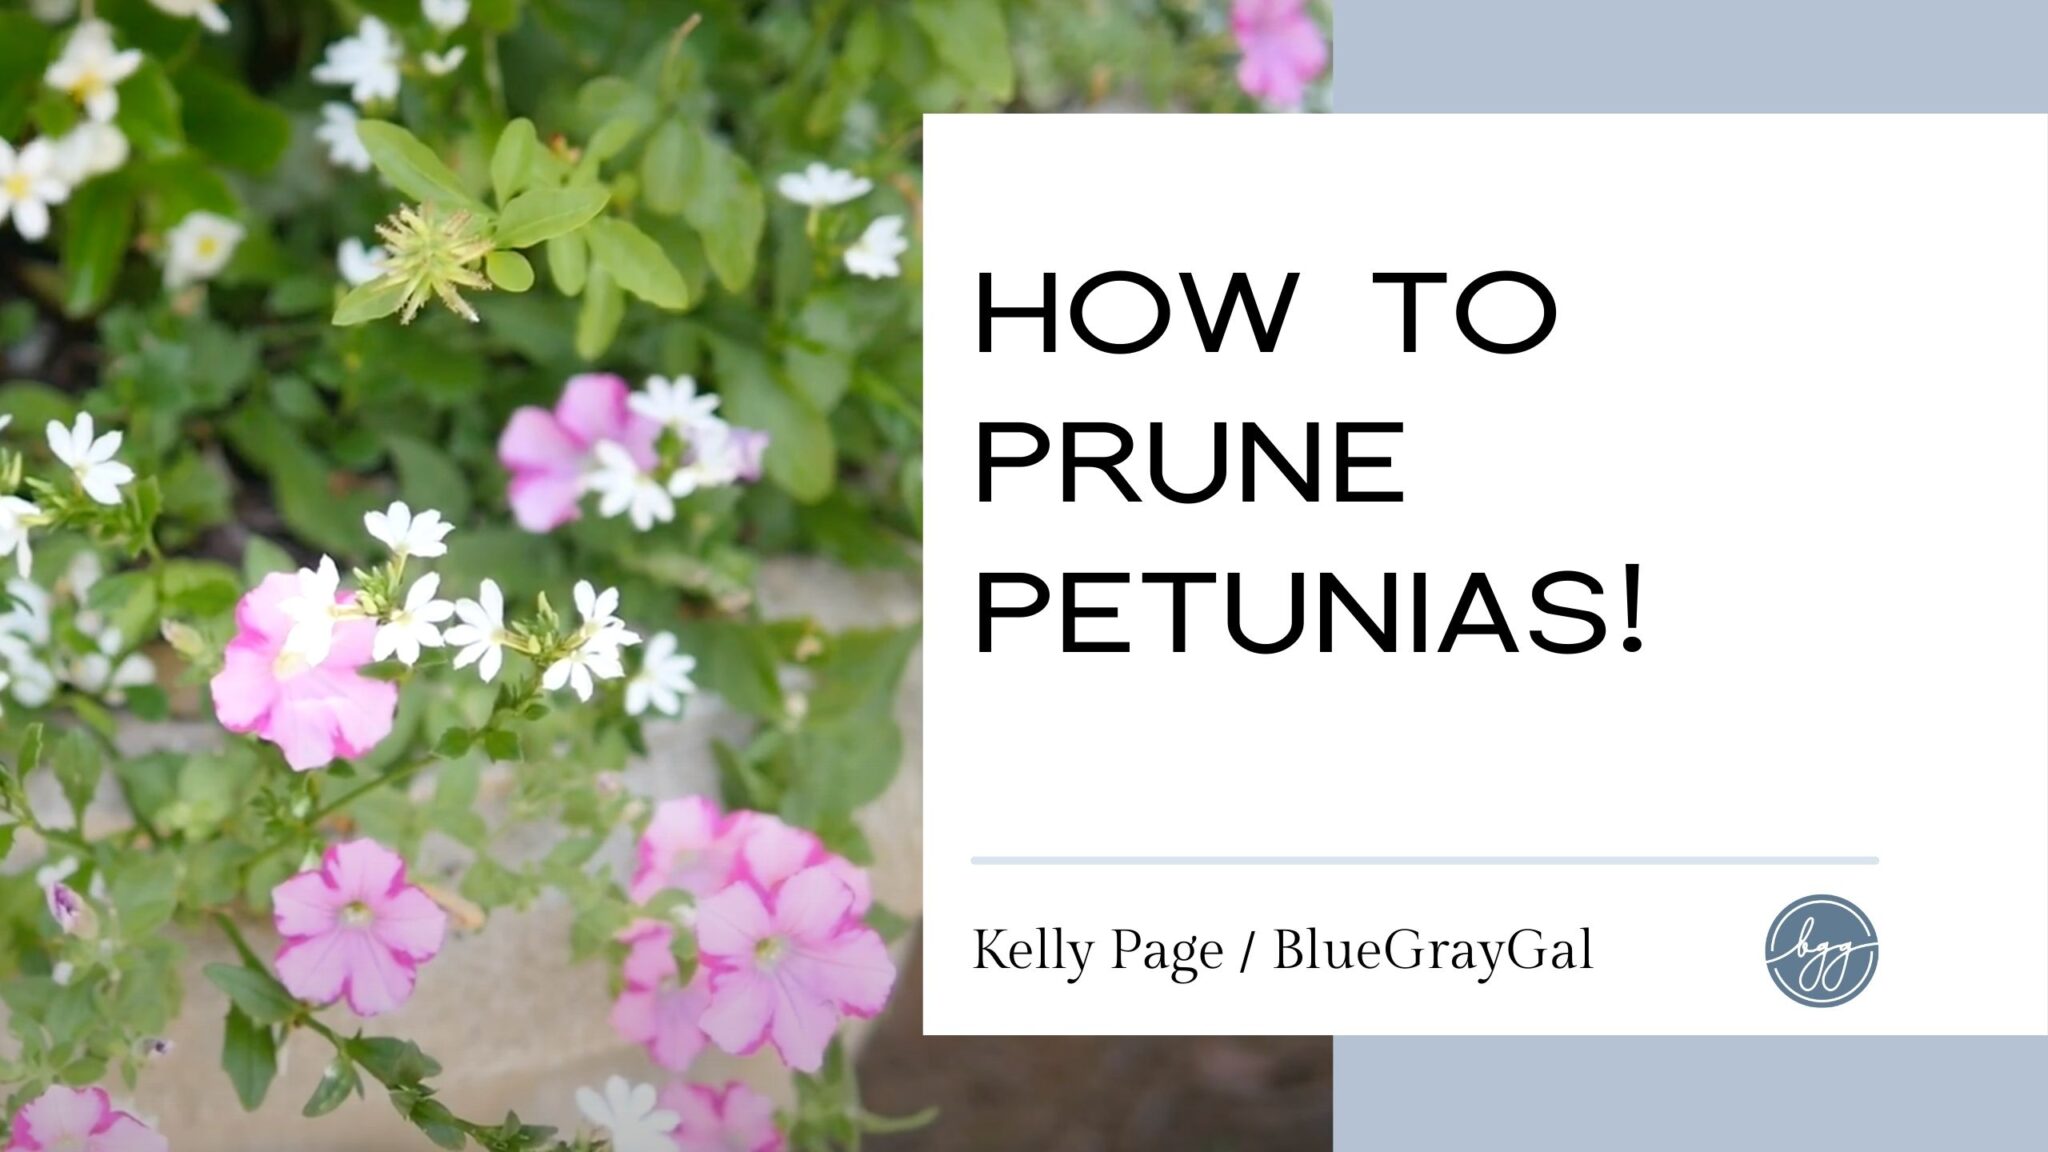 How to prune petunias in the summer.